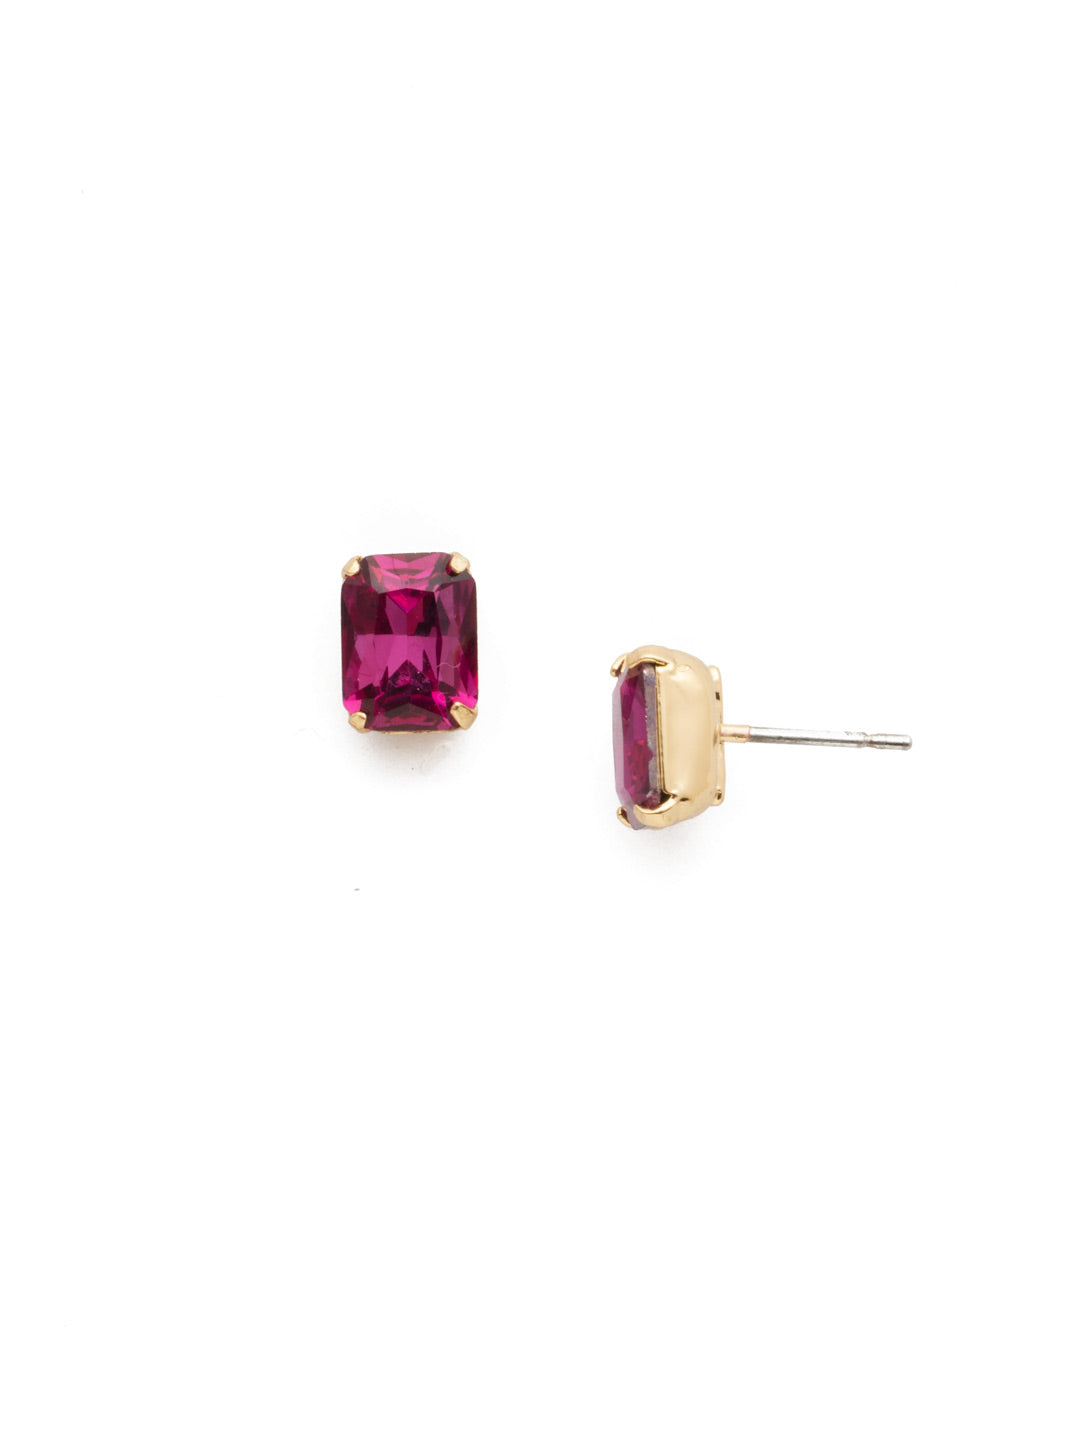 Mini Emerald Cut Stud Earrings - EBY42BGBGA - <p>Simply sophisticated. The mini emerald cut stud earrings can be worn alone or paired with anything for an extra accent to any wardrobe. From Sorrelli's Begonia collection in our Bright Gold-tone finish.</p>